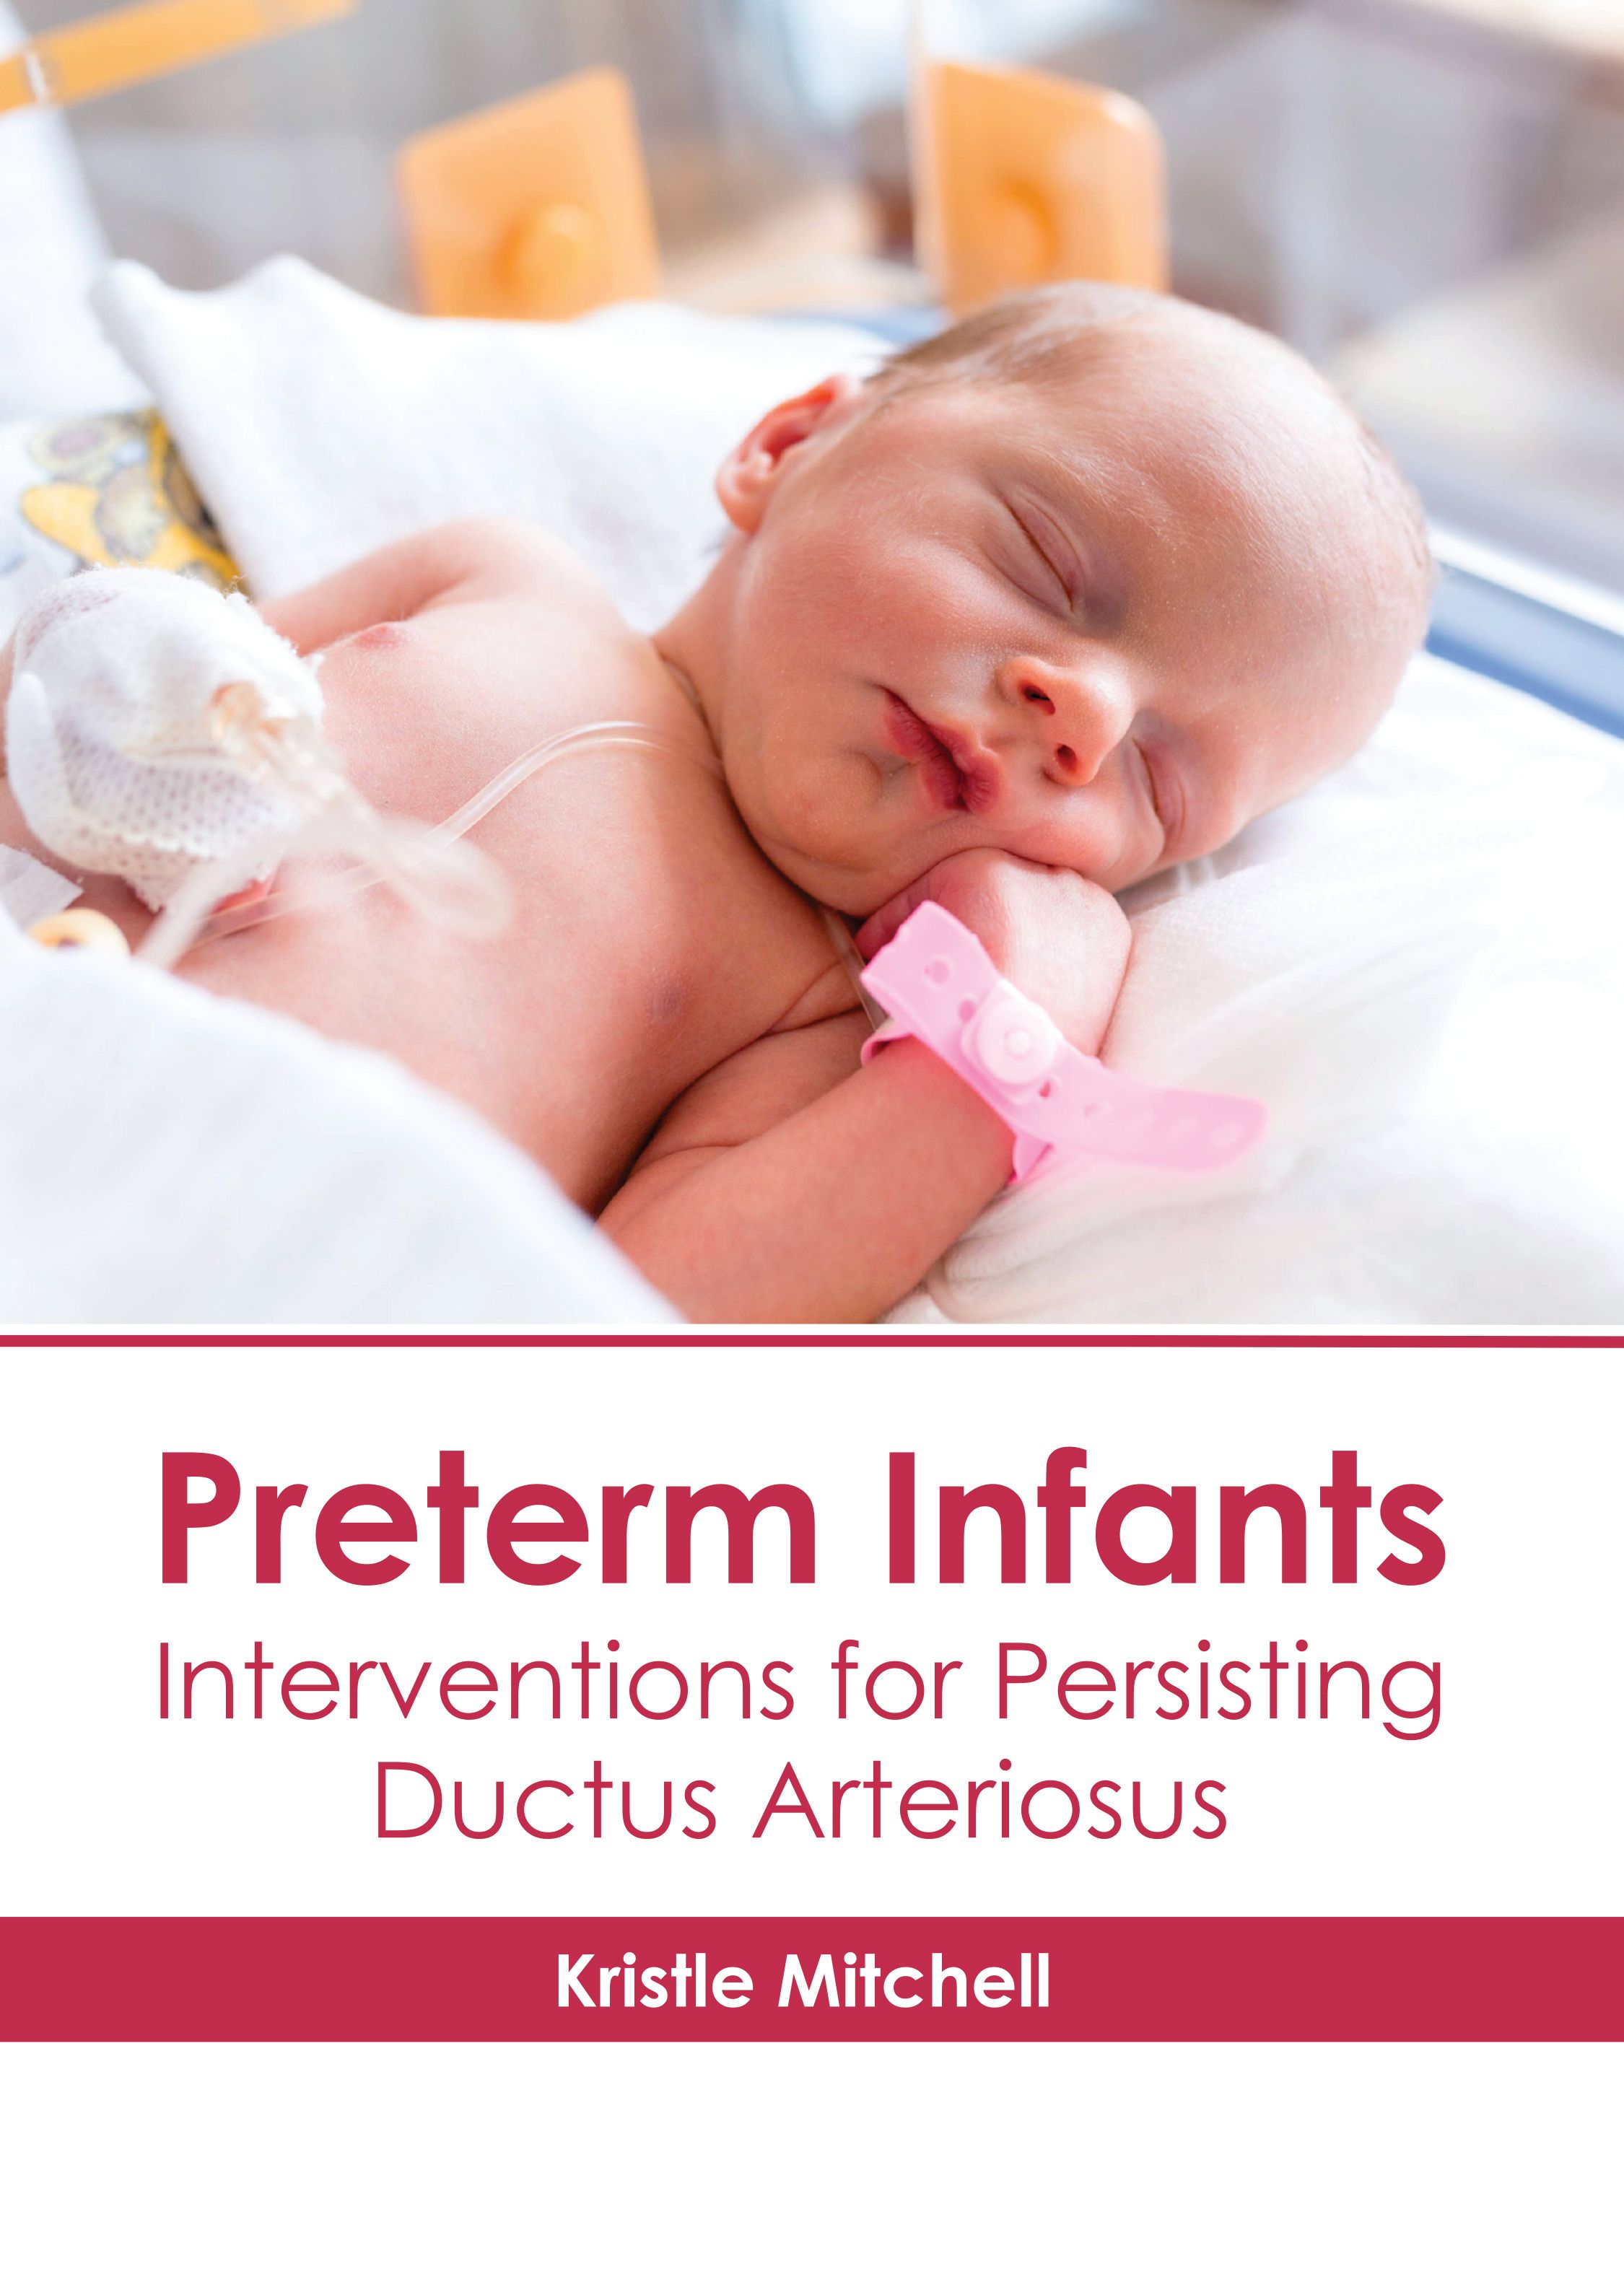 

exclusive-publishers/american-medical-publishers/preterm-infants-interventions-for-persisting-ductus-arteriosus-9798887403892